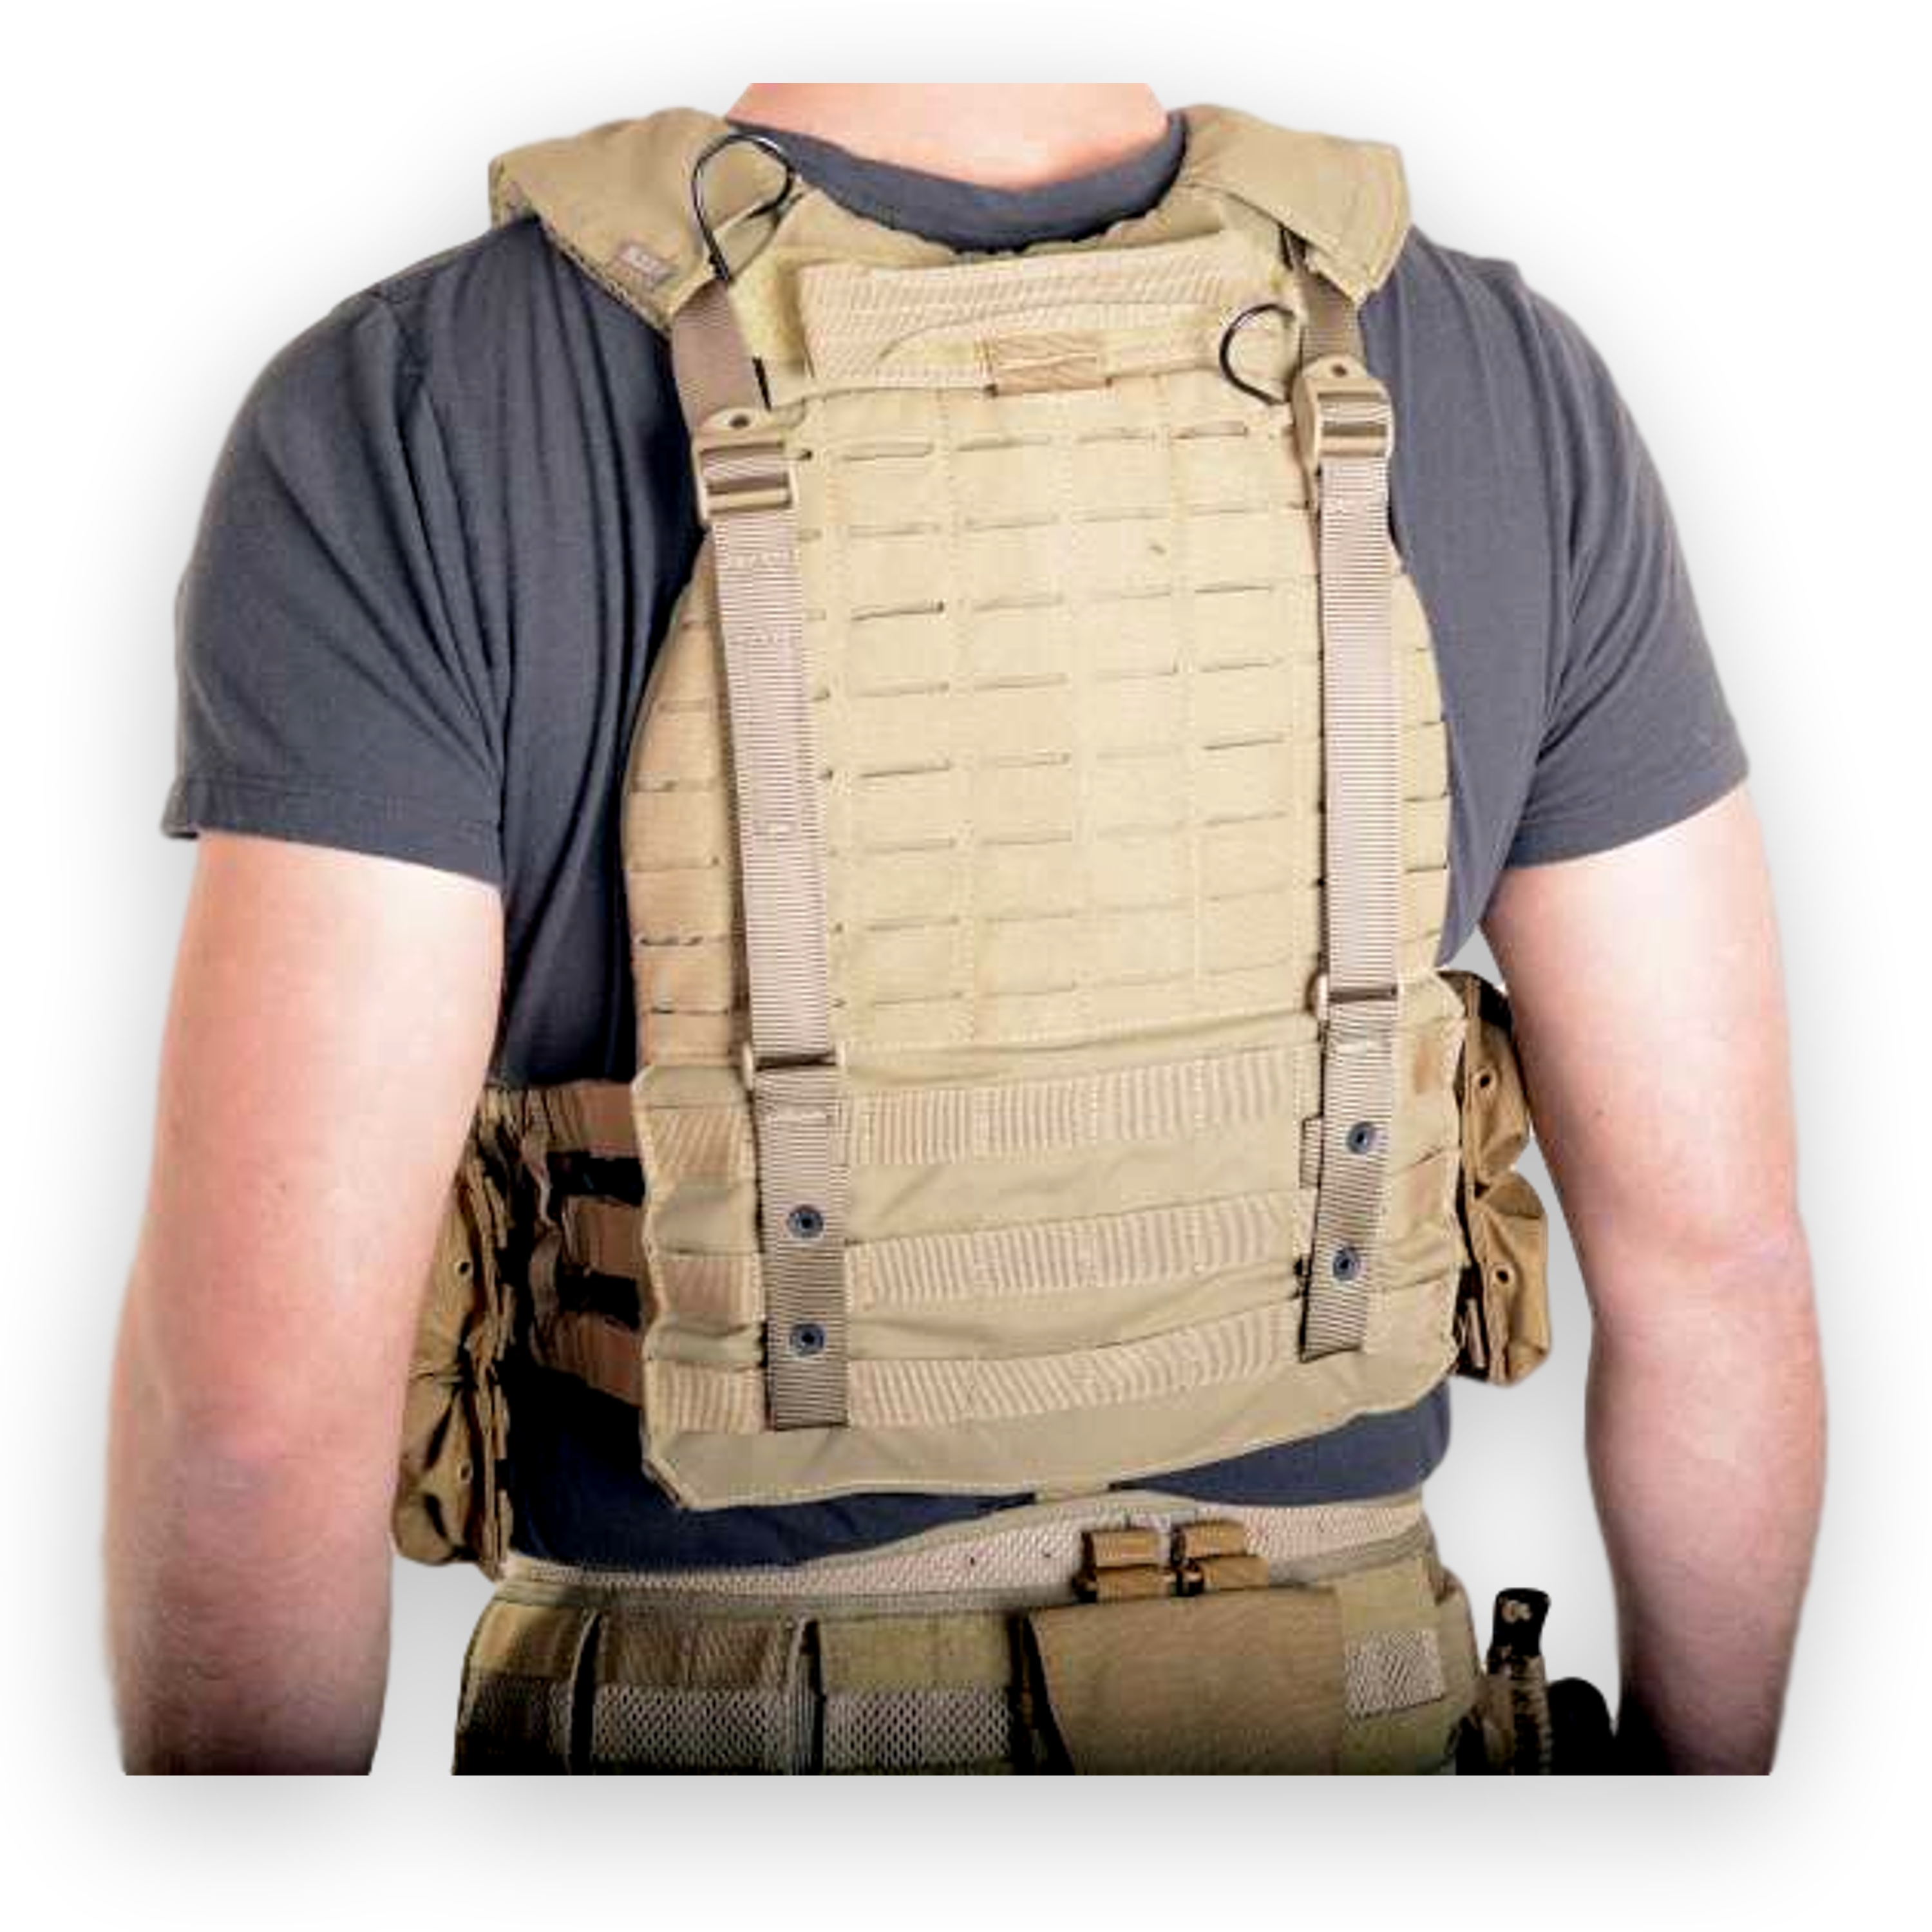 V-Point Tactical Rifle Sling Available for Sale